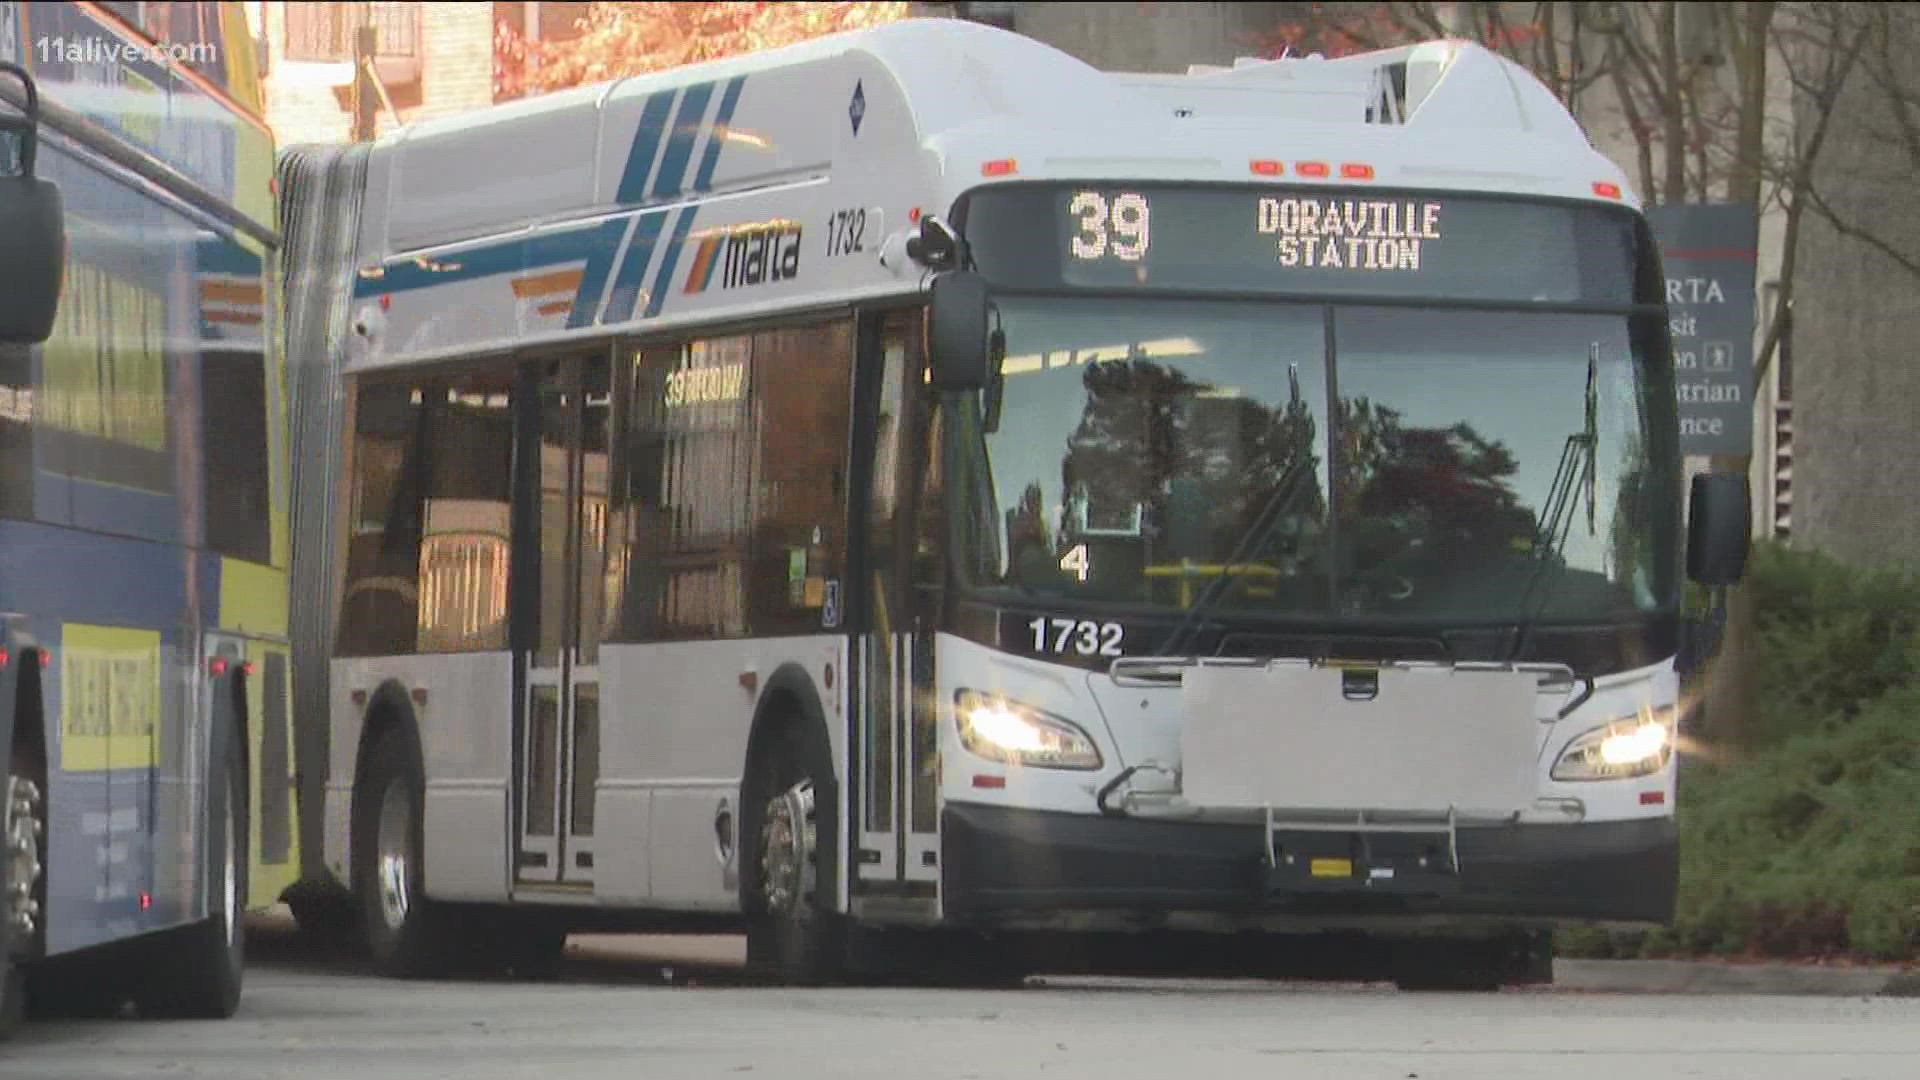 The changes go into effect Dec. 18 and will reduce how frequently most routes are run.